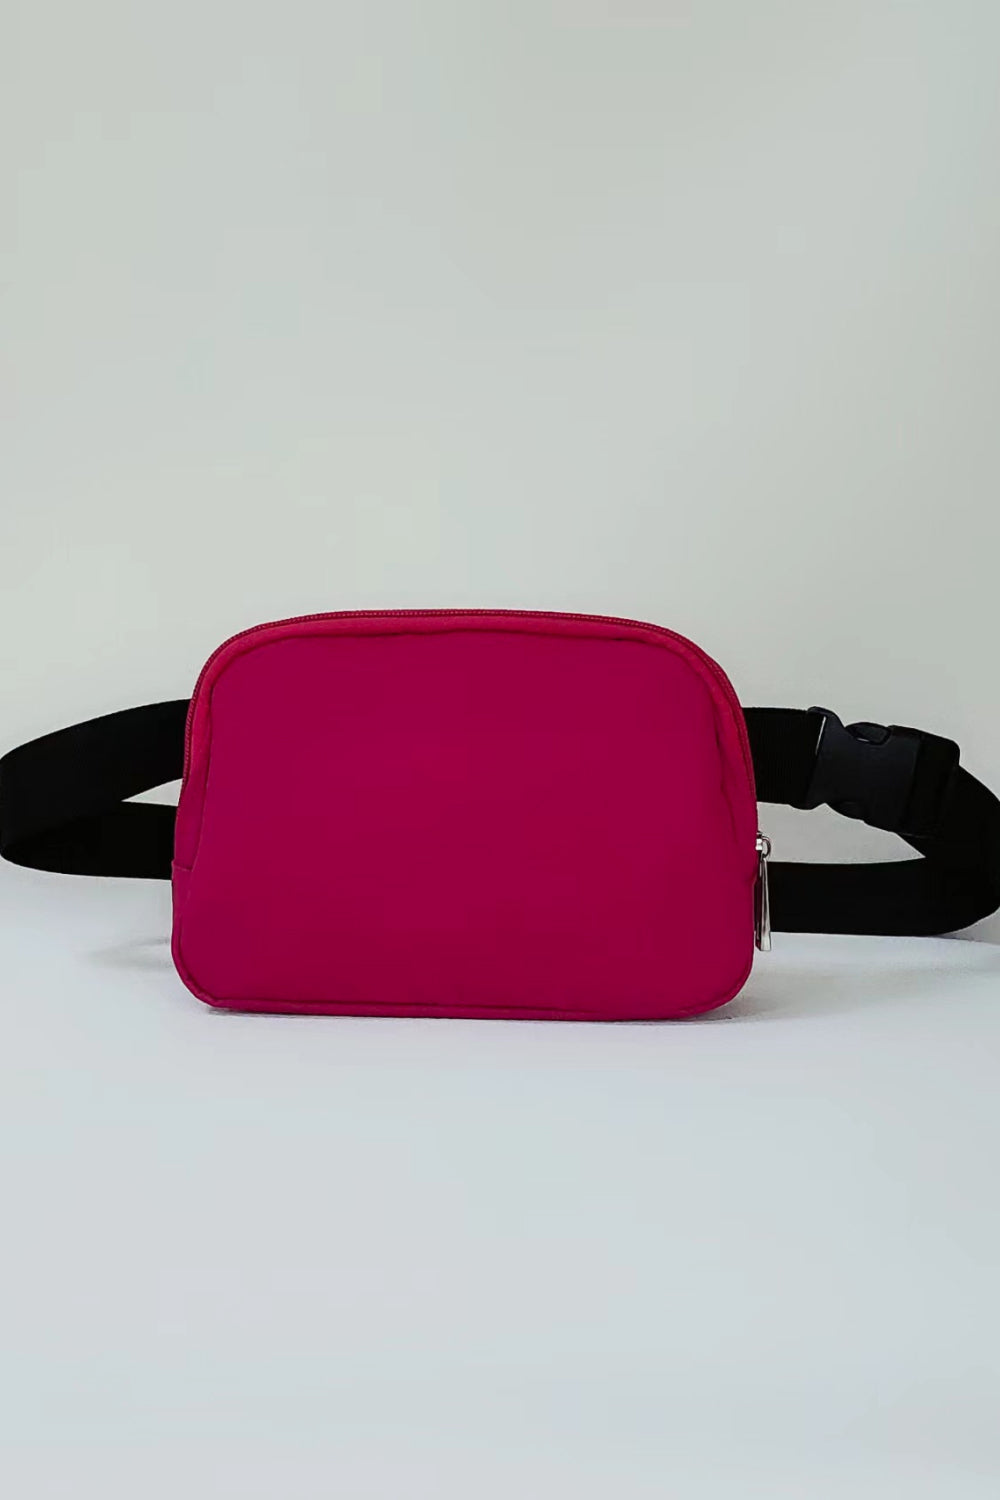 Buckle Zip Closure Fanny Pack COCO CRESS